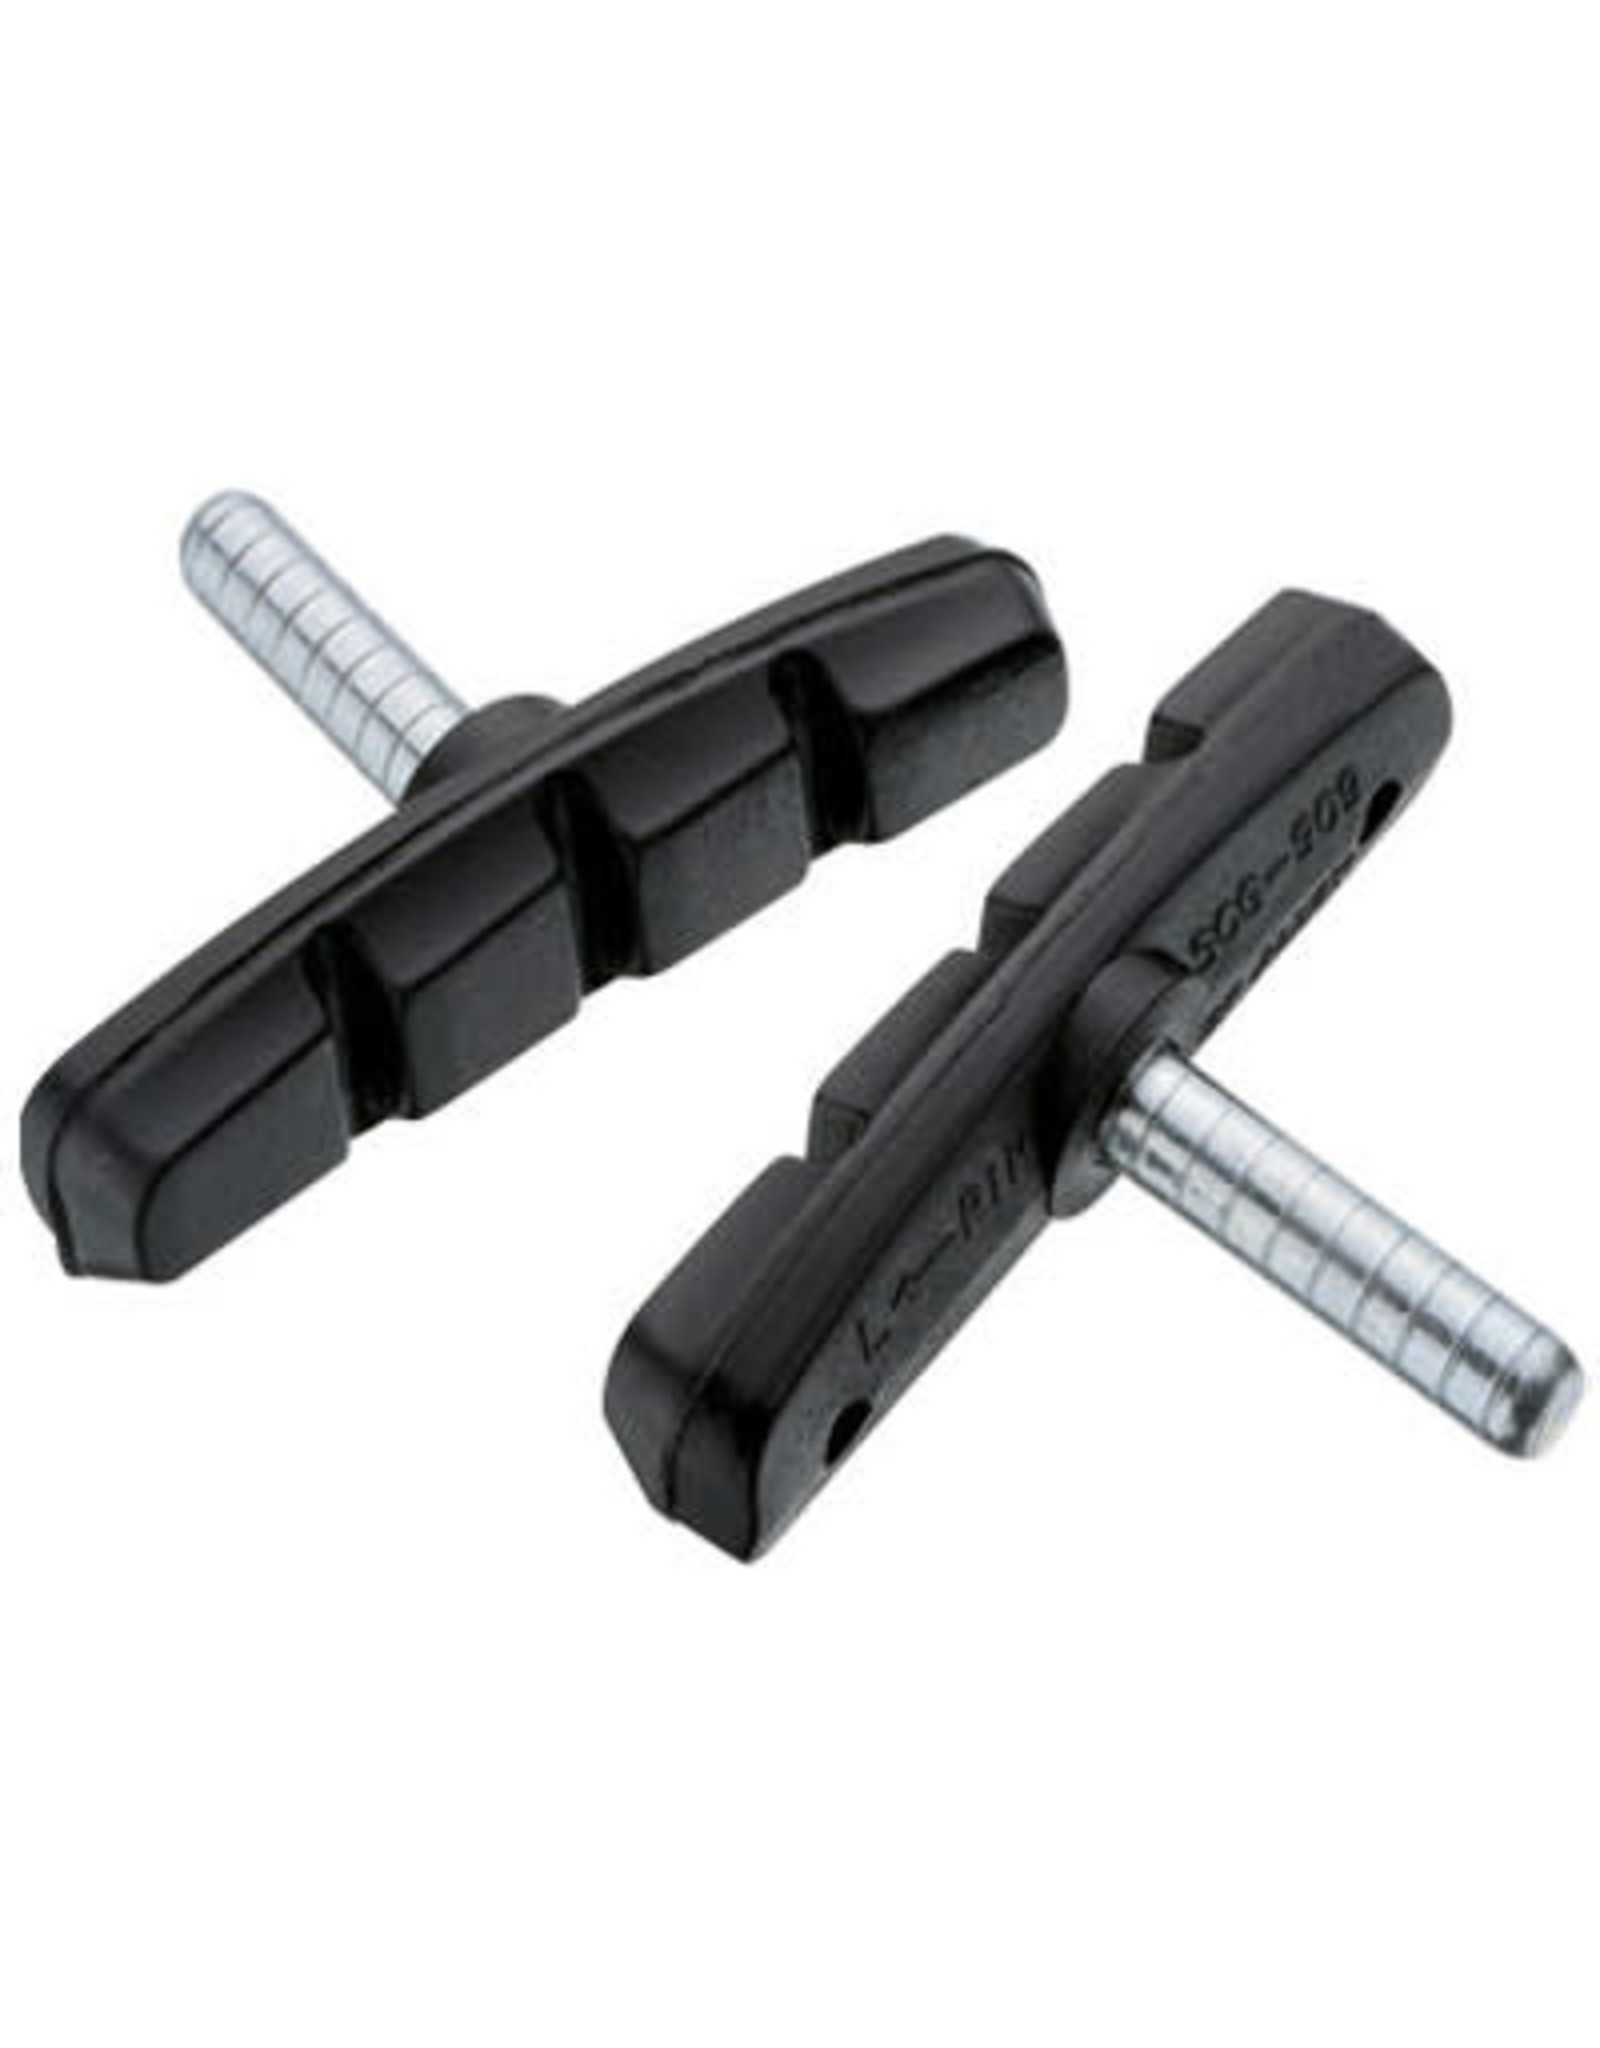 Brake Pads Cantilever Basic Replacement PAIR